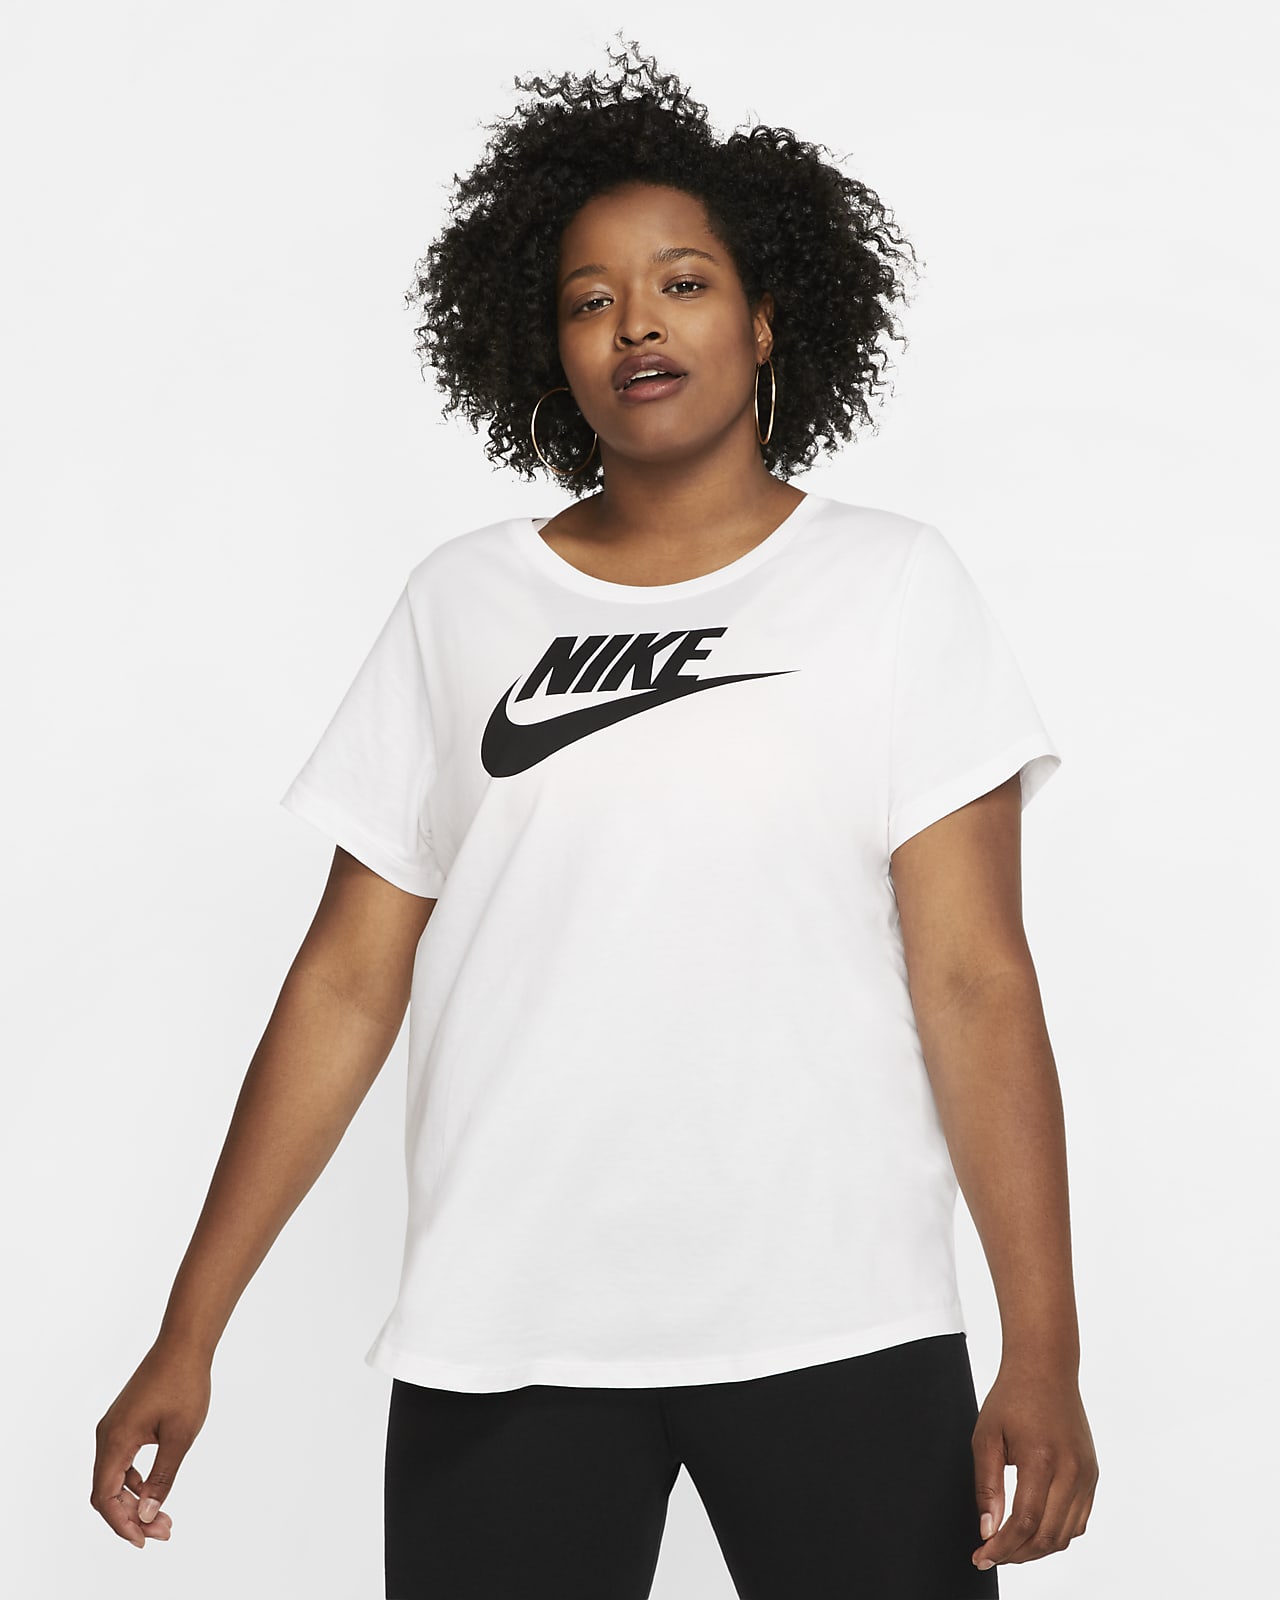 nike outfits for plus size women